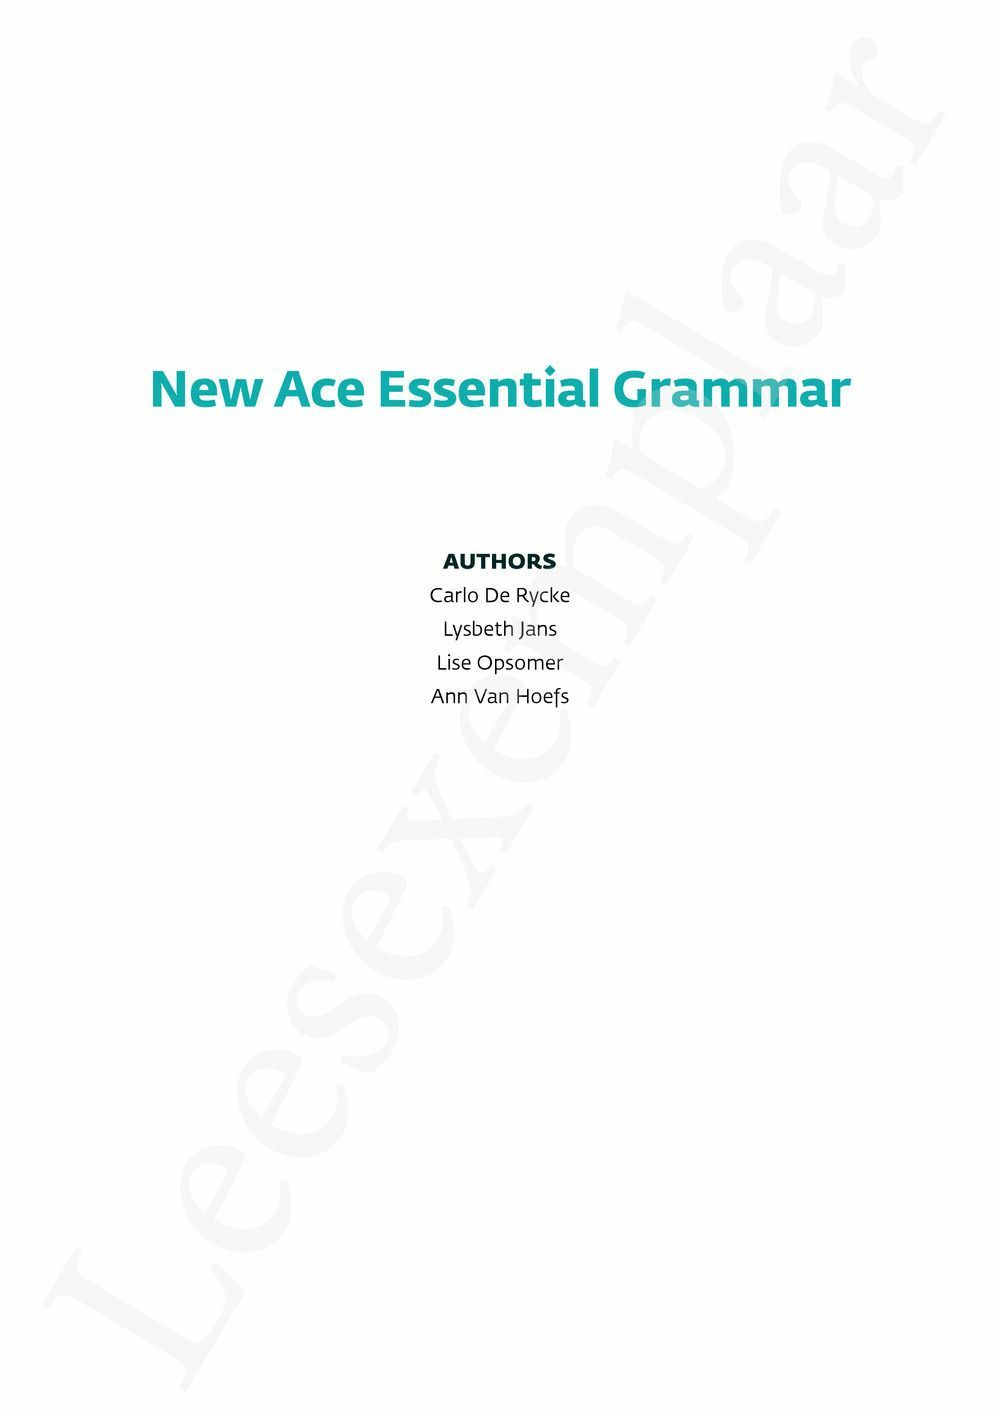 Preview: New Ace Essential Grammar